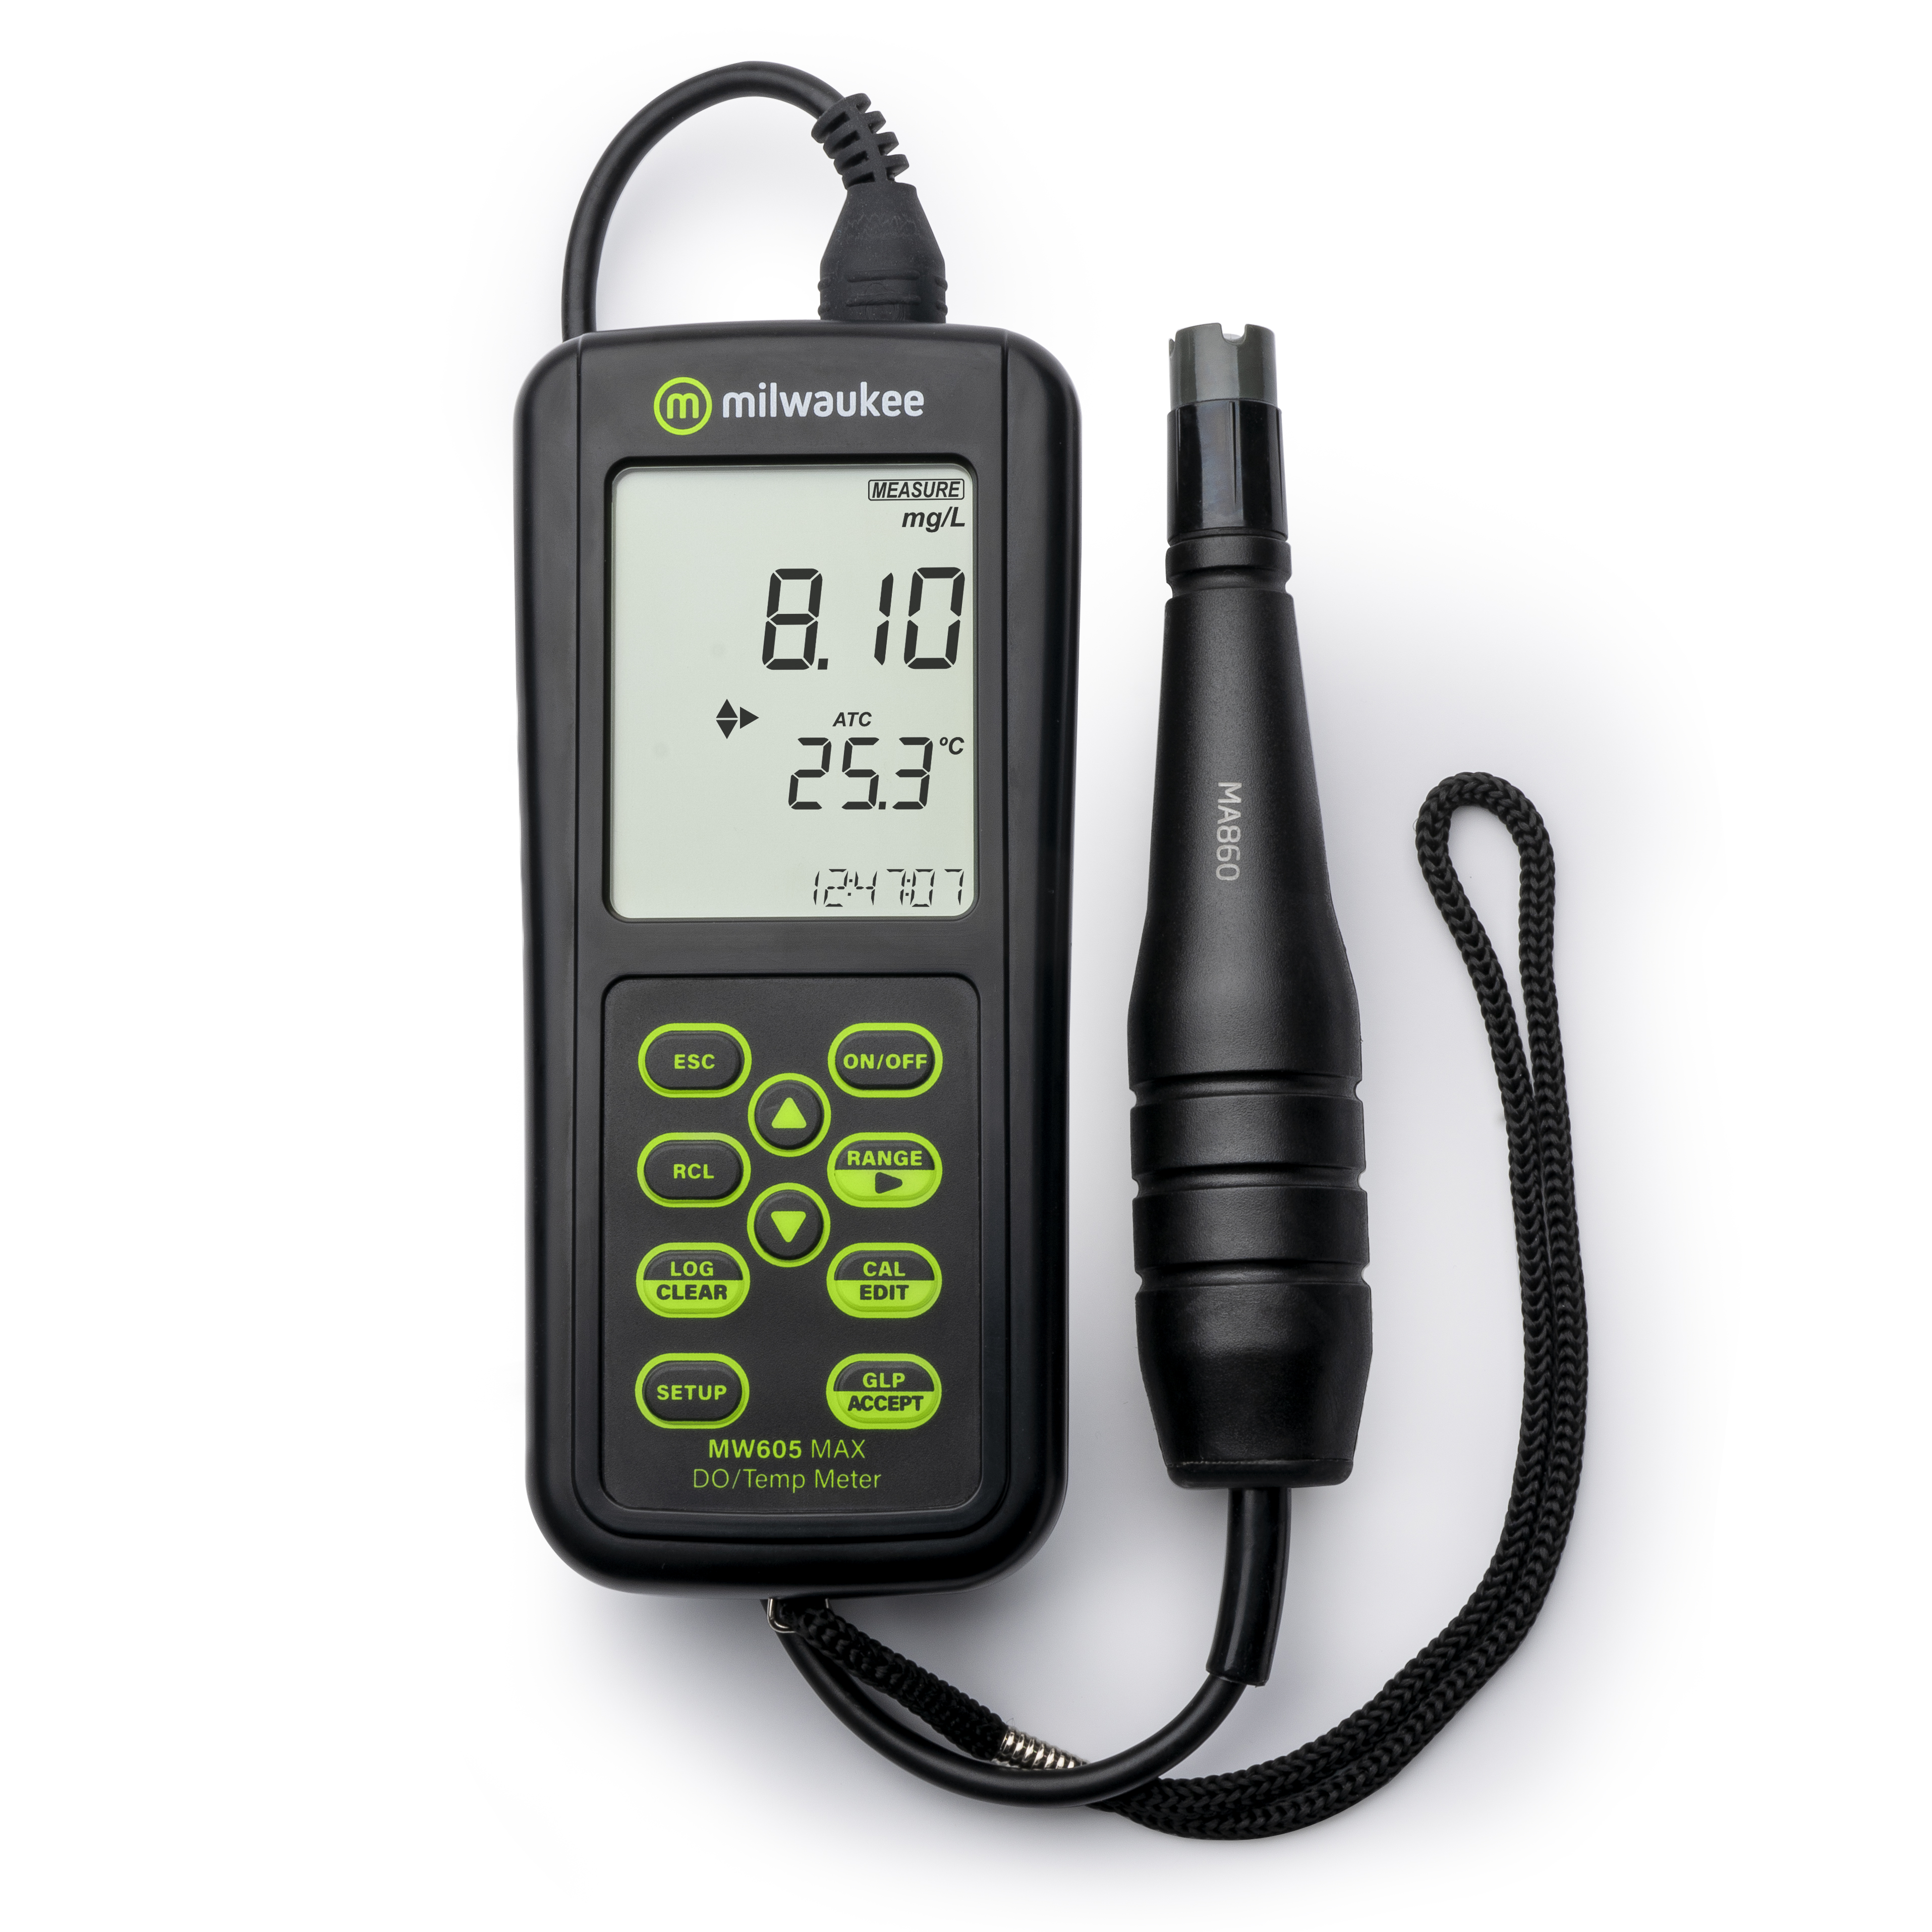 Milwaukee MW605 MAX Waterproof Galvanic Dissolved Oxygen Meter With Automatic Calibration